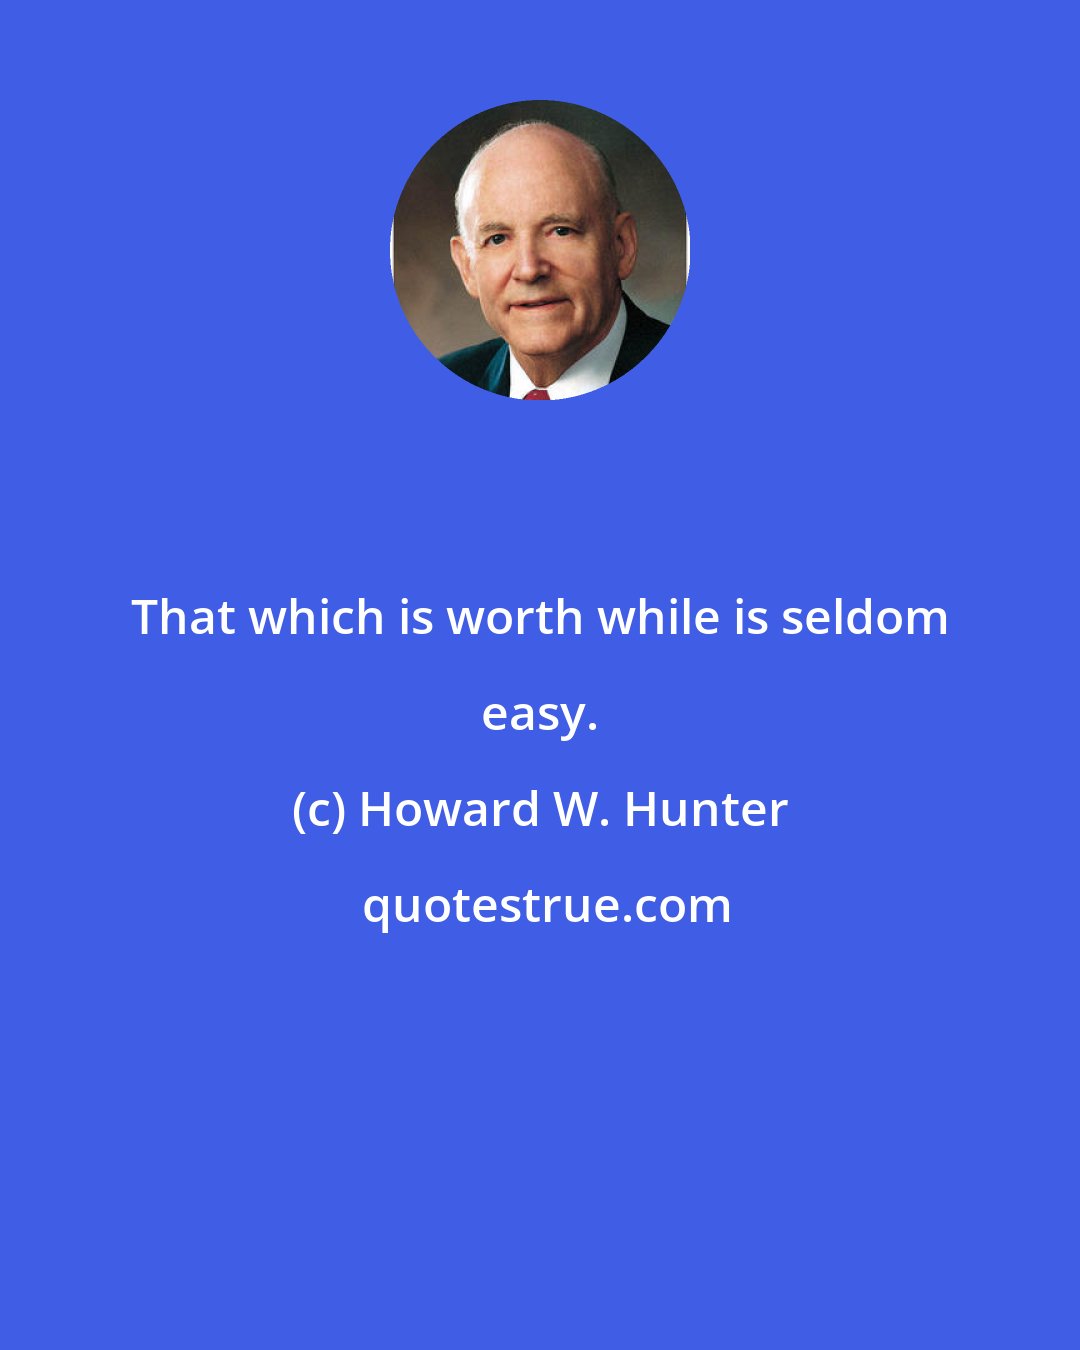 Howard W. Hunter: That which is worth while is seldom easy.